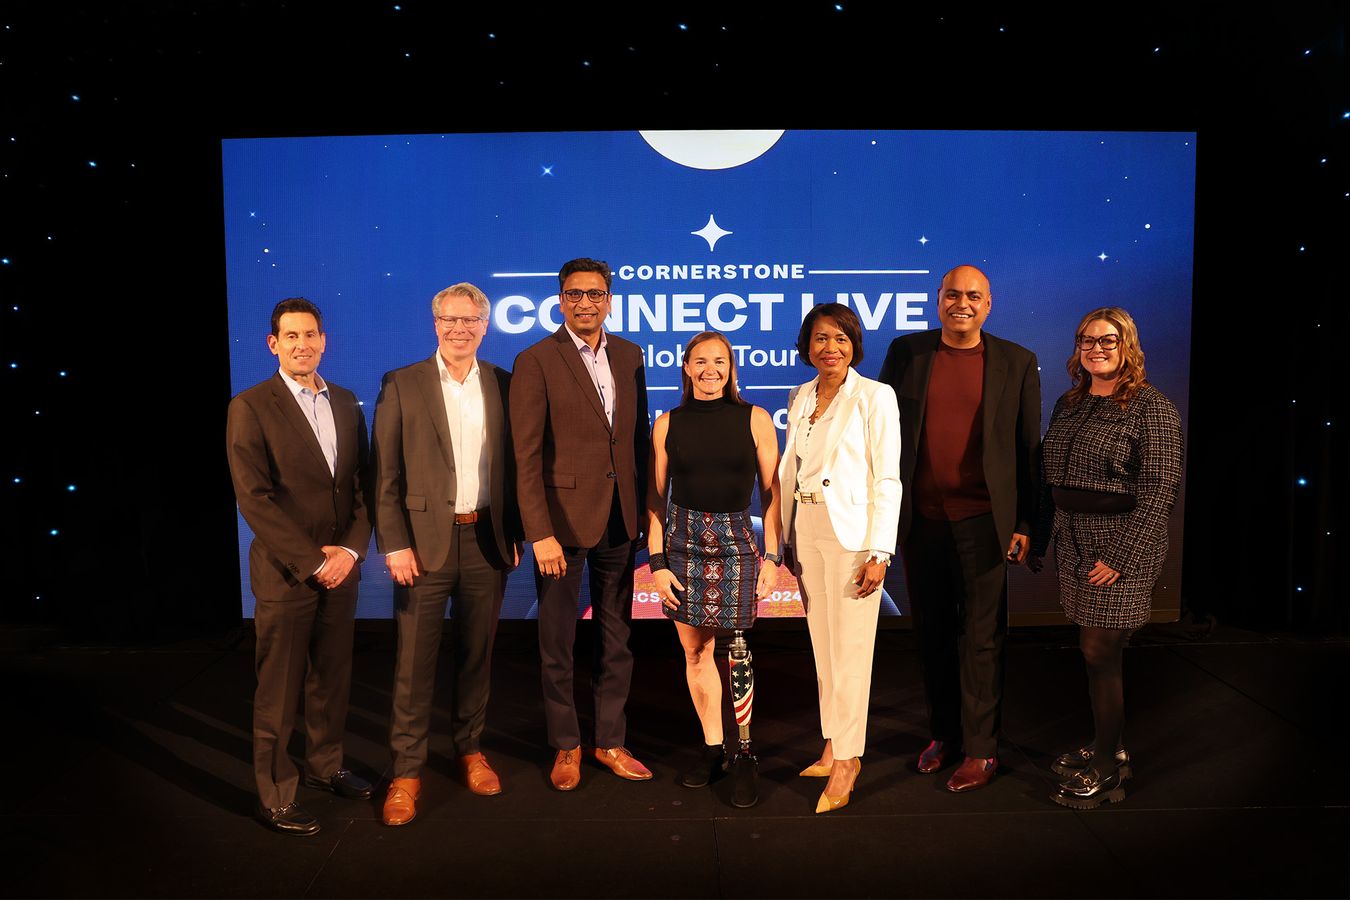 A new era of work unveiled at Cornerstone Connect Live Chicago